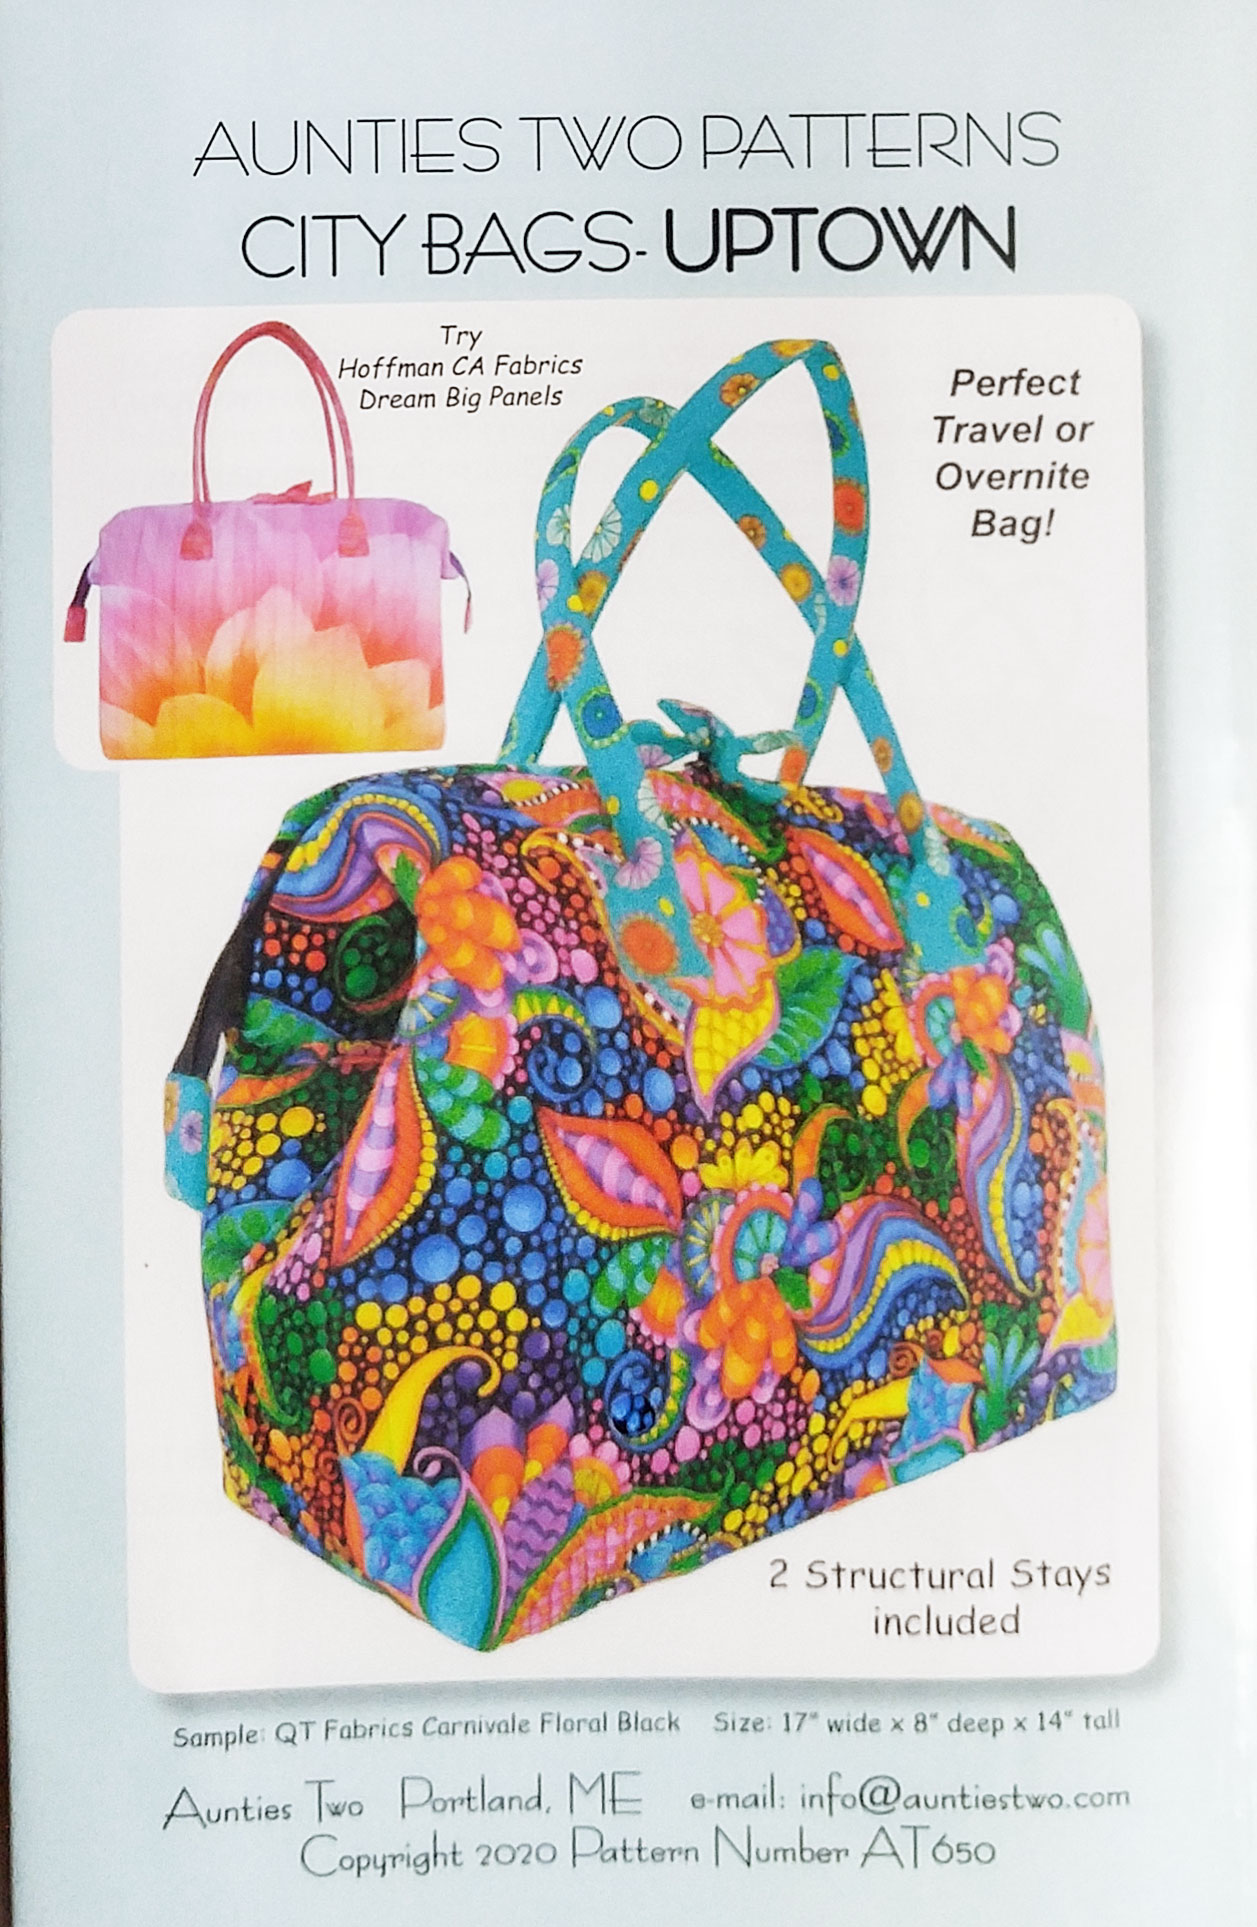 City-Bag-Uptown-sewing-pattern-Aunties-Two-front